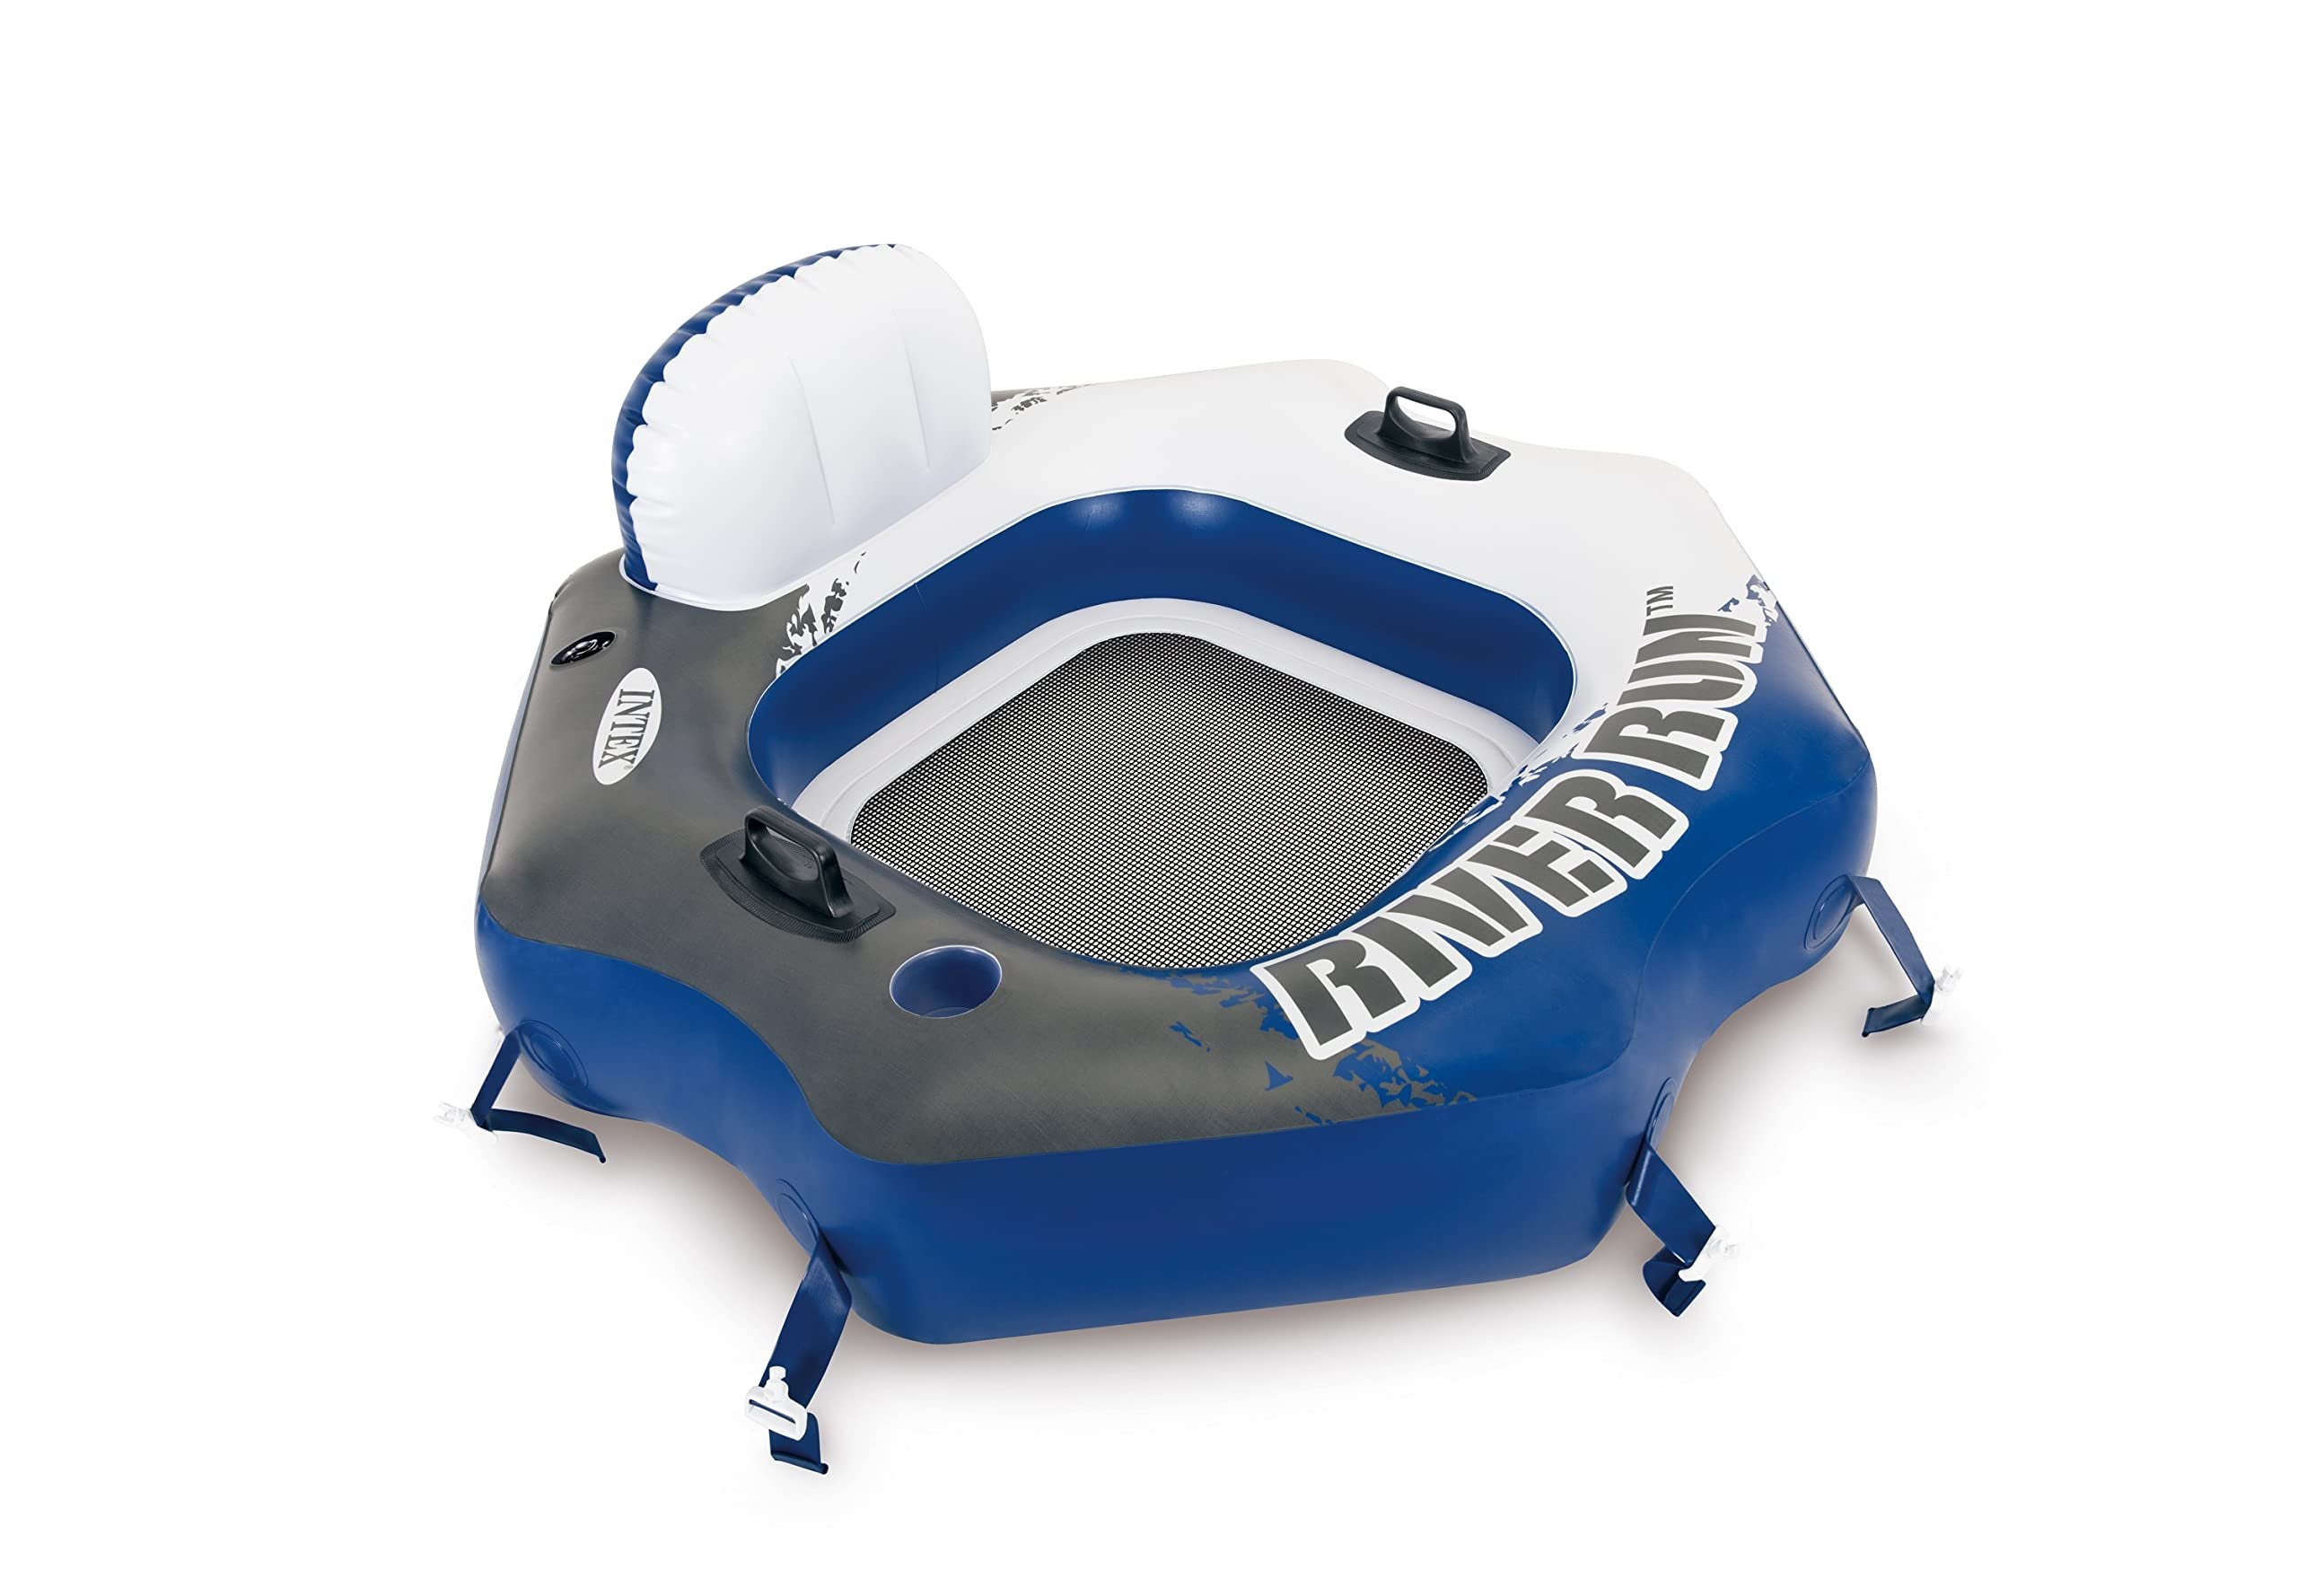 INTEX 58854EP River Run Connect Inflatable Floating Lounge: Comfortable Backrest - Built-in Cup Holder - Durable Grab Handles - Easy-to-Use Connectors - 220lb Weight Capacity